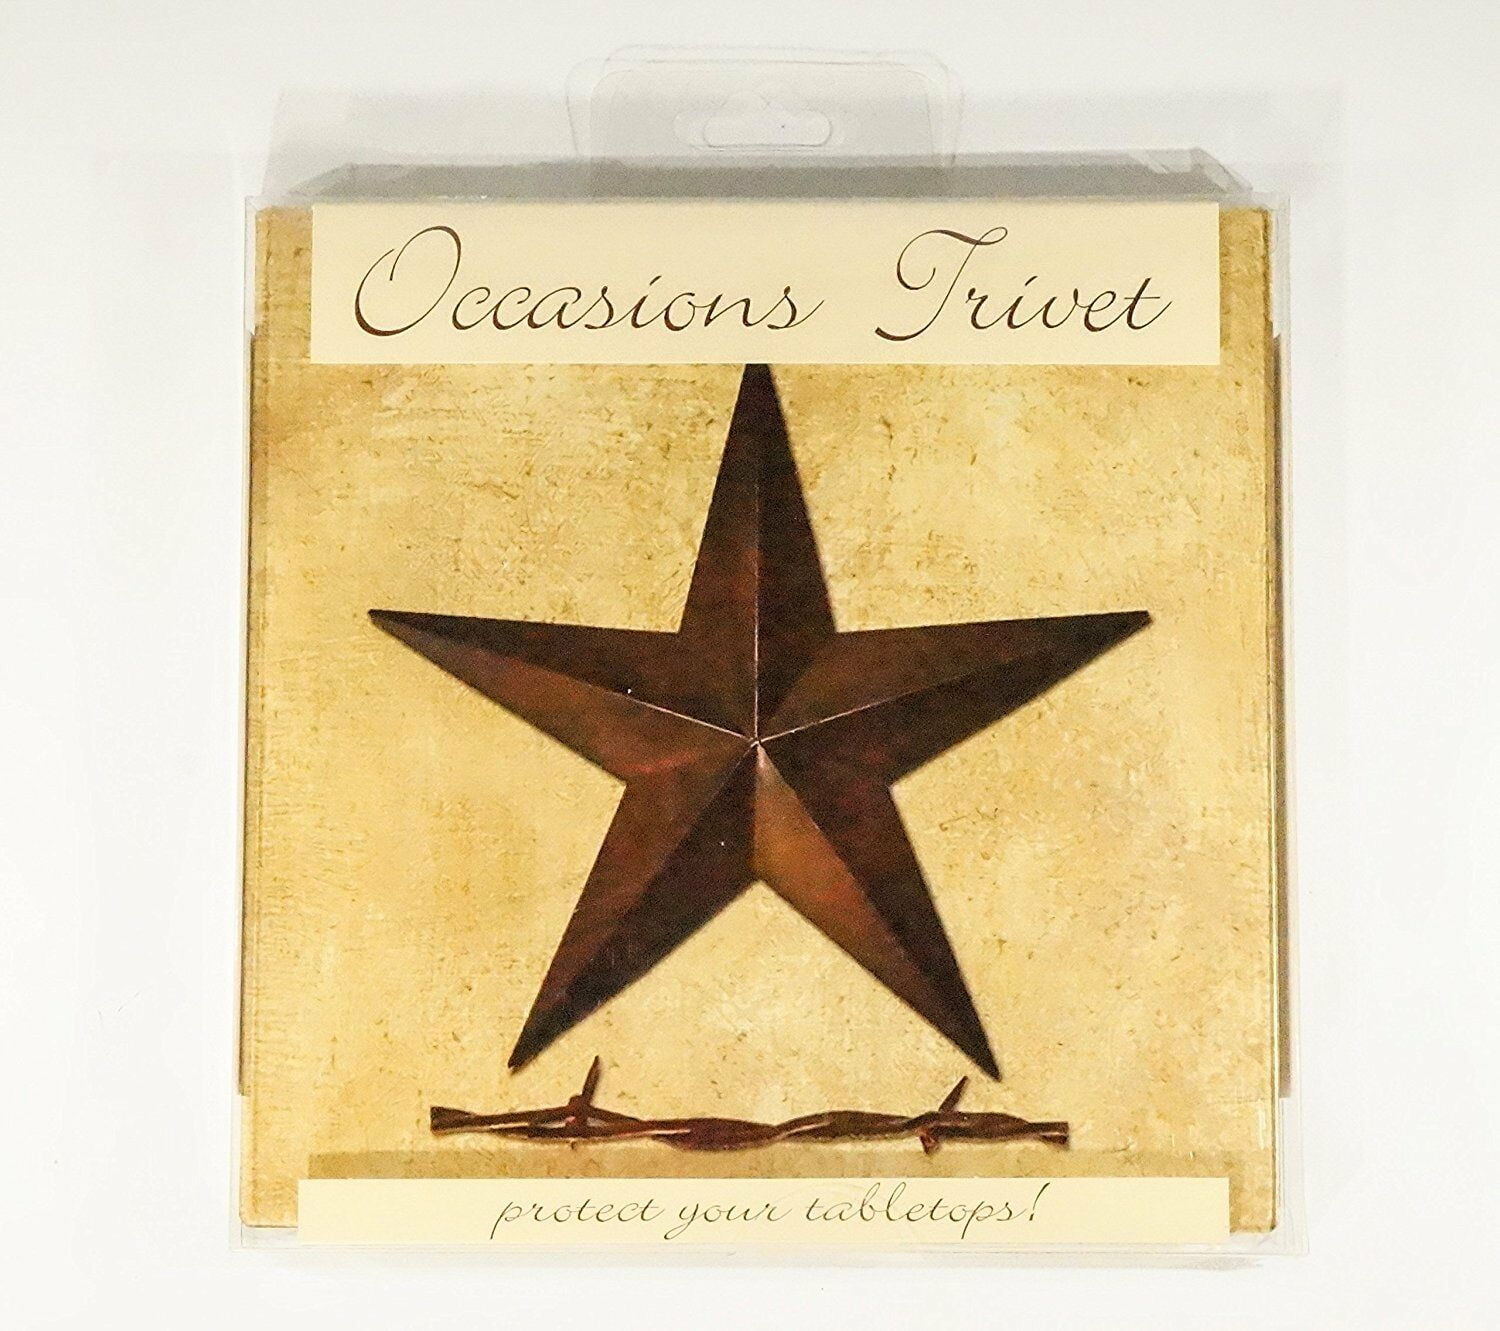 Texas Star Thirstystone Occasions Trivet Multicolor